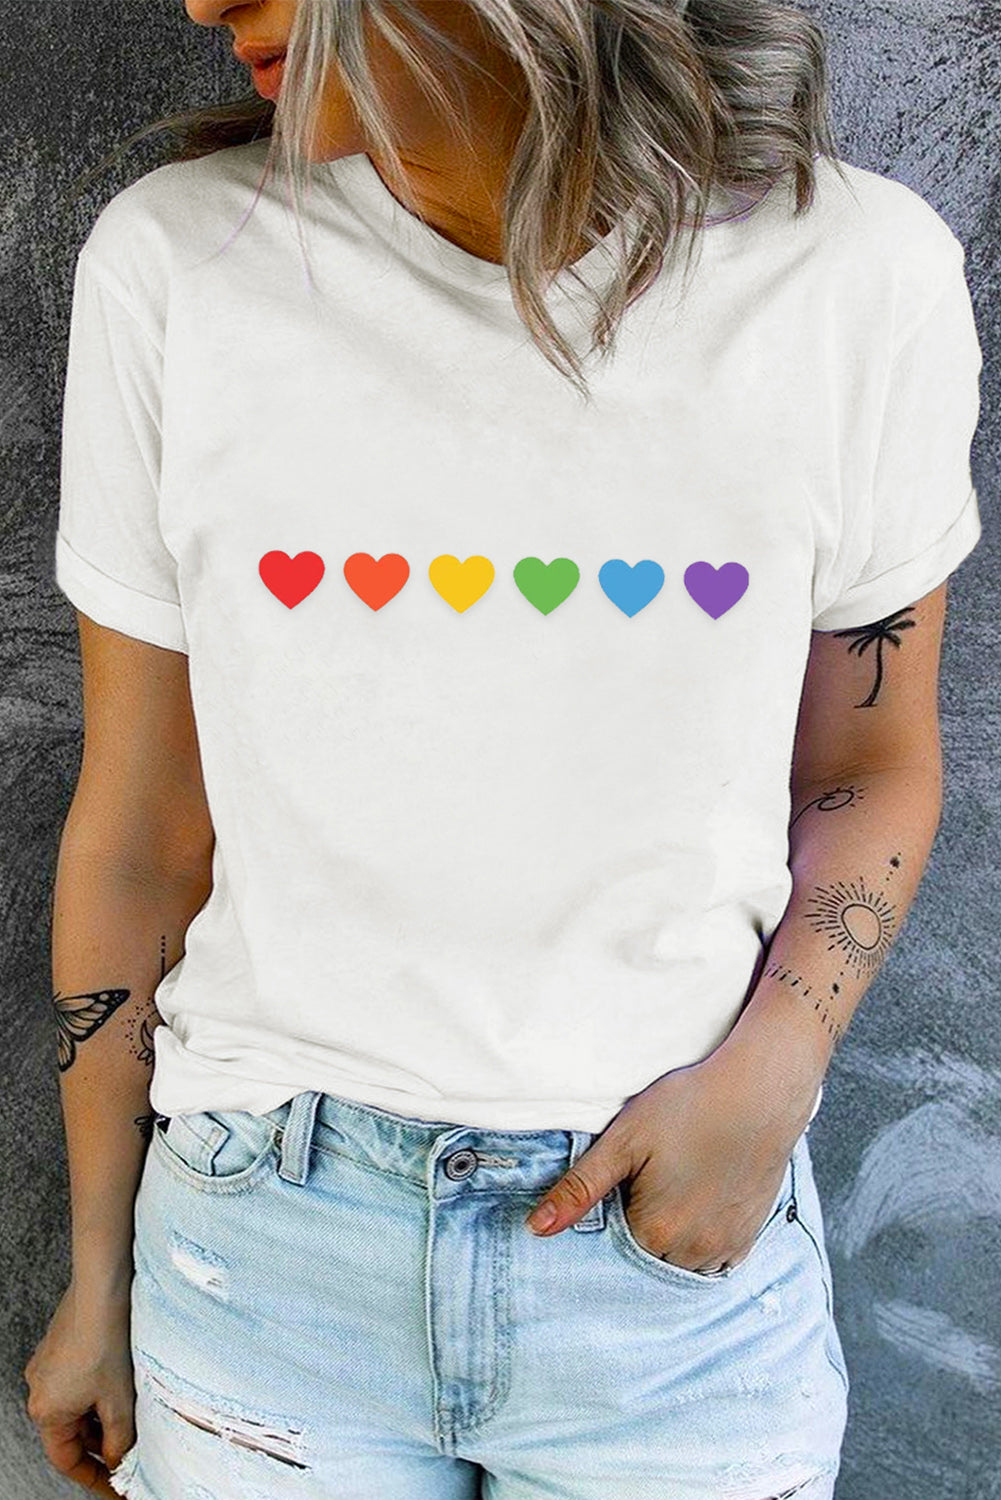 LC25216195-1-S, LC25216195-1-M, LC25216195-1-L, LC25216195-1-XL, LC25216195-1-2XL, White Women Pride Rainbow Color Heart Shapes Graphic Tee Summer Shirts Tops